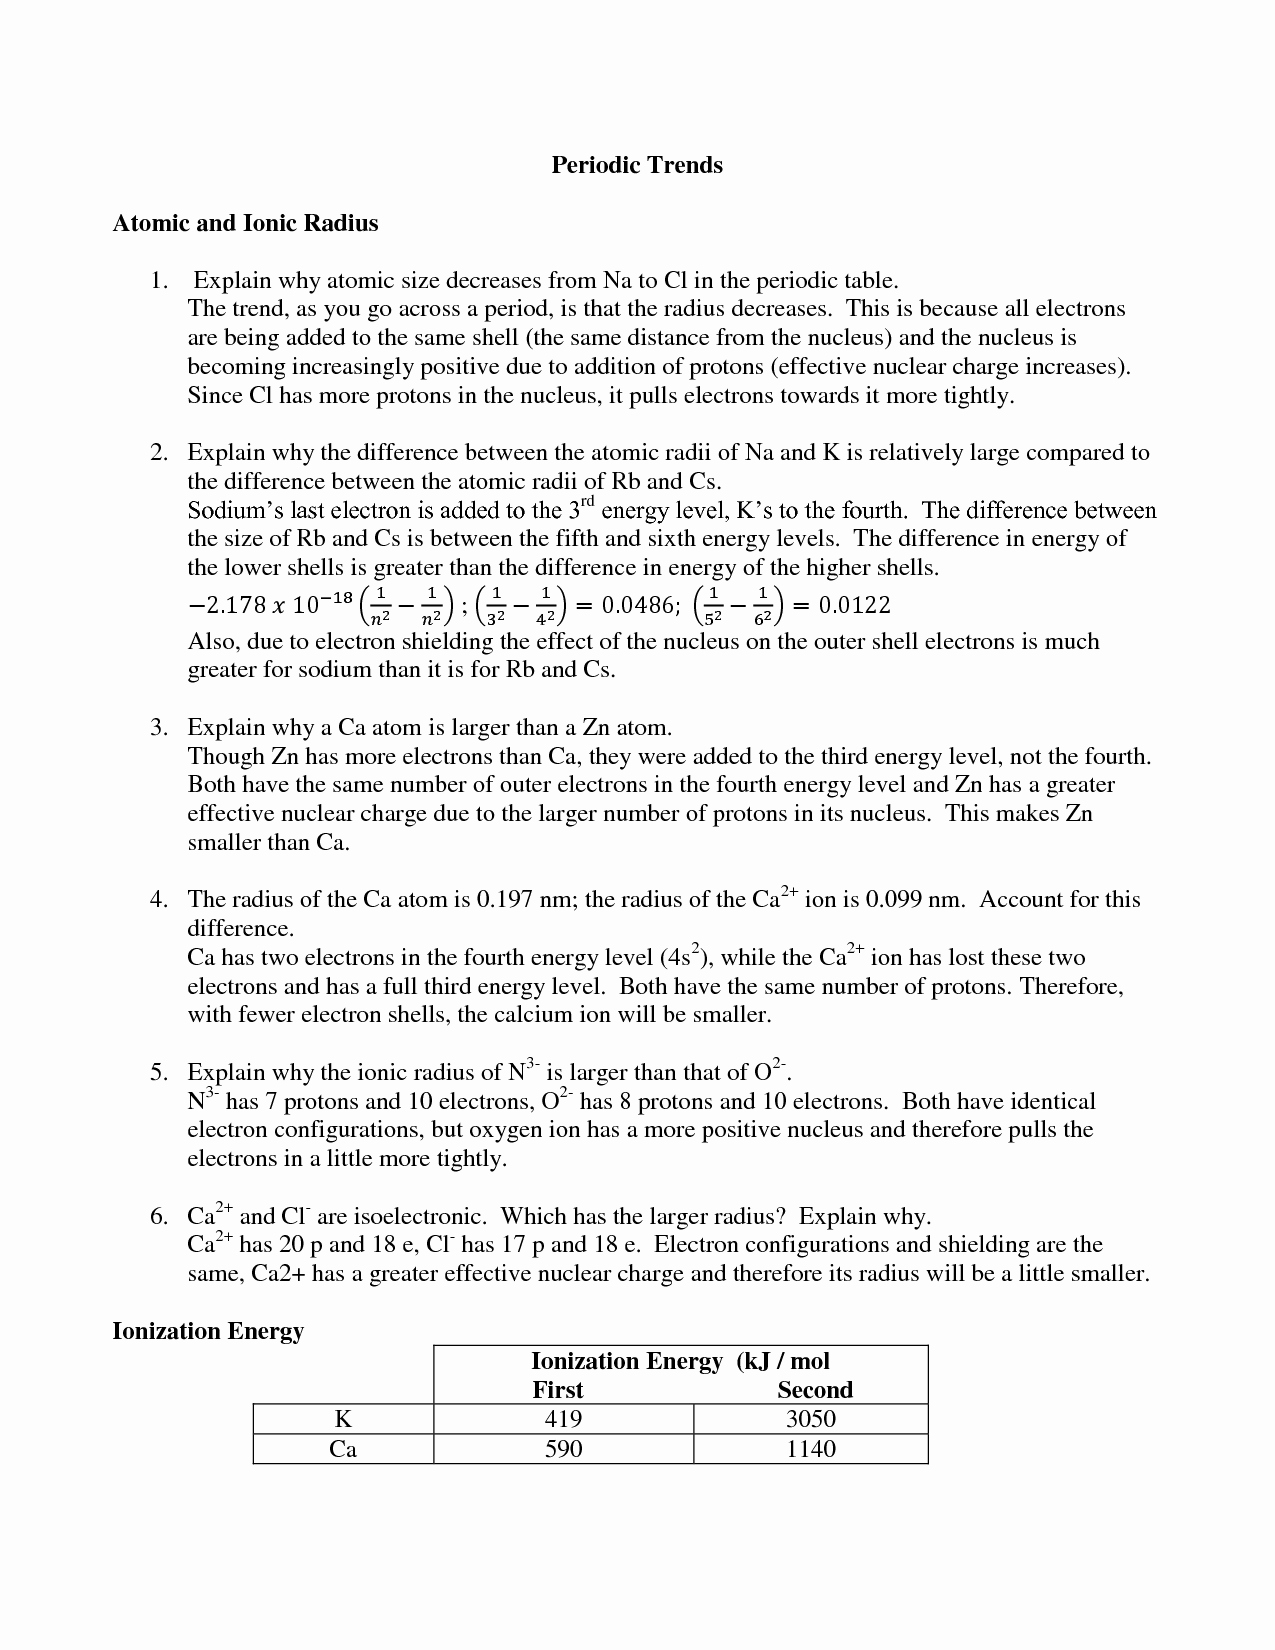 Periodic Trends Worksheet Answer Key Inspirational 20 Best Of Periodic Trends Worksheet Answers Key